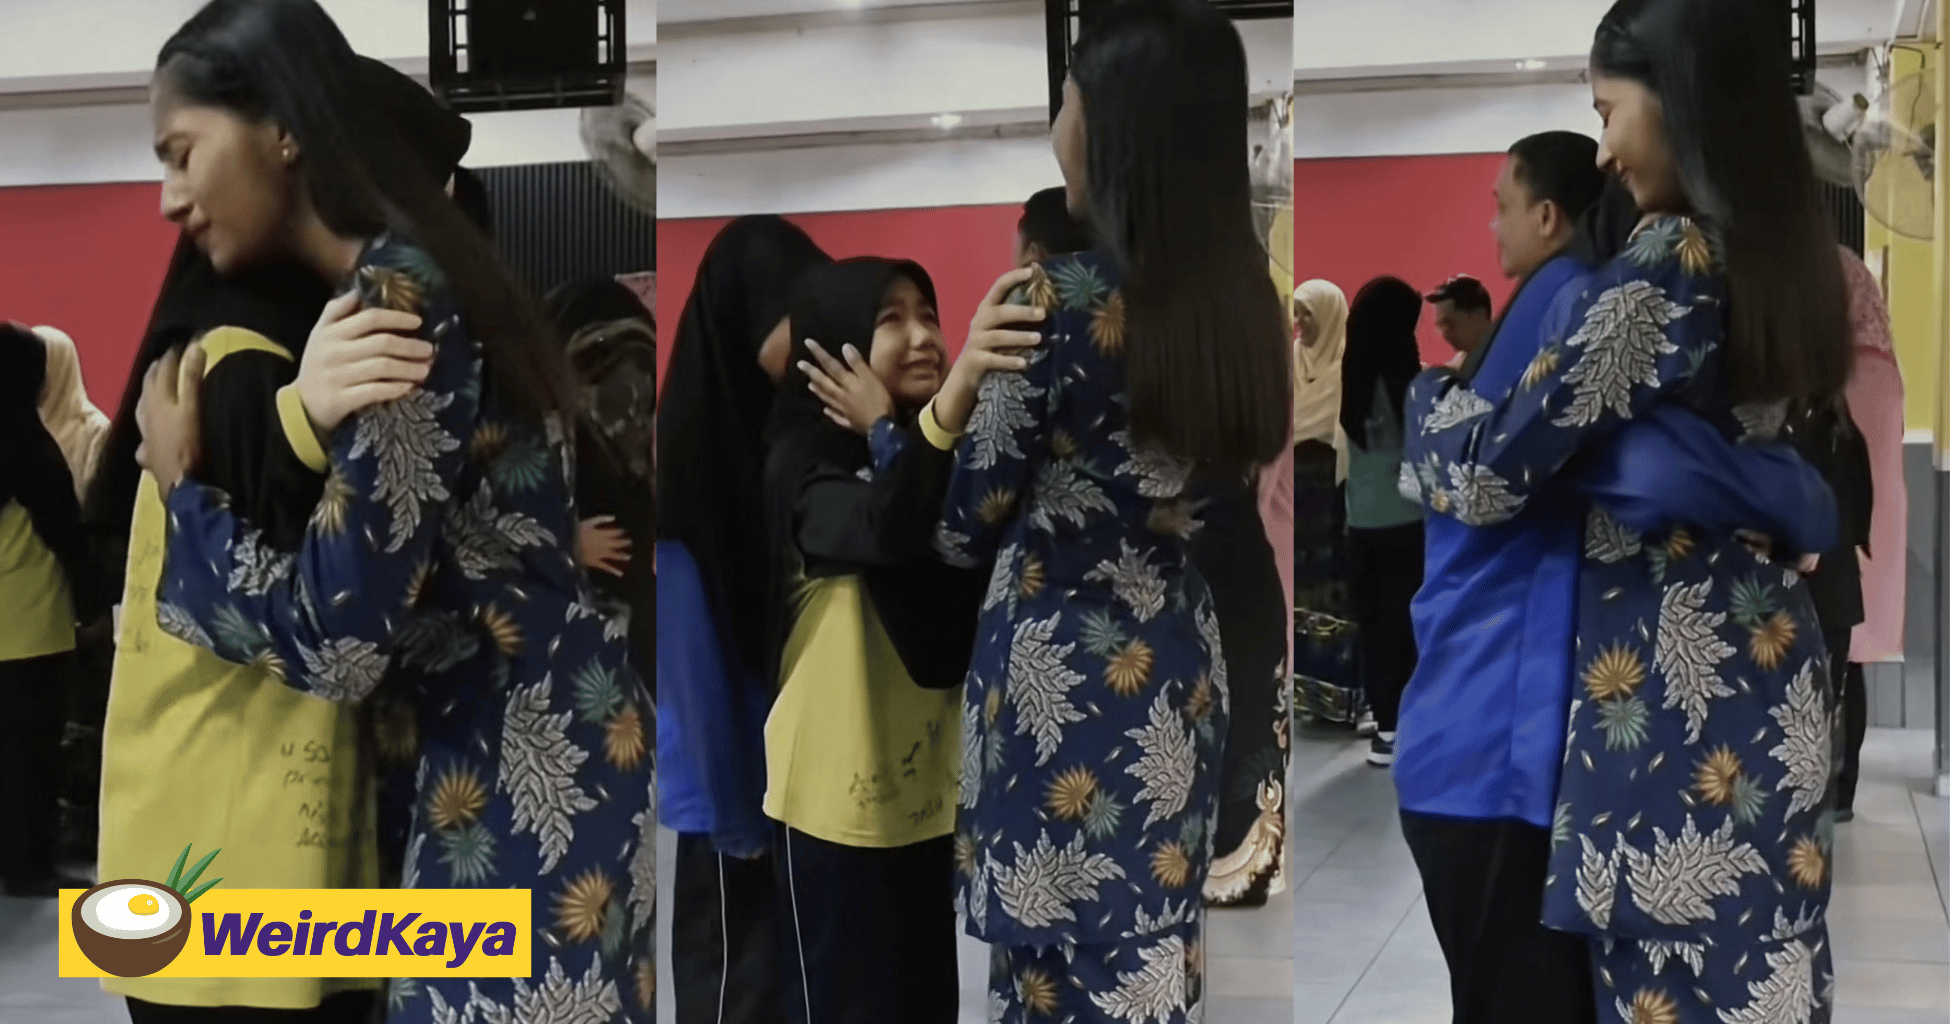 12yo Students Cry While Hugging Their English Teacher On Their Last Day Of School